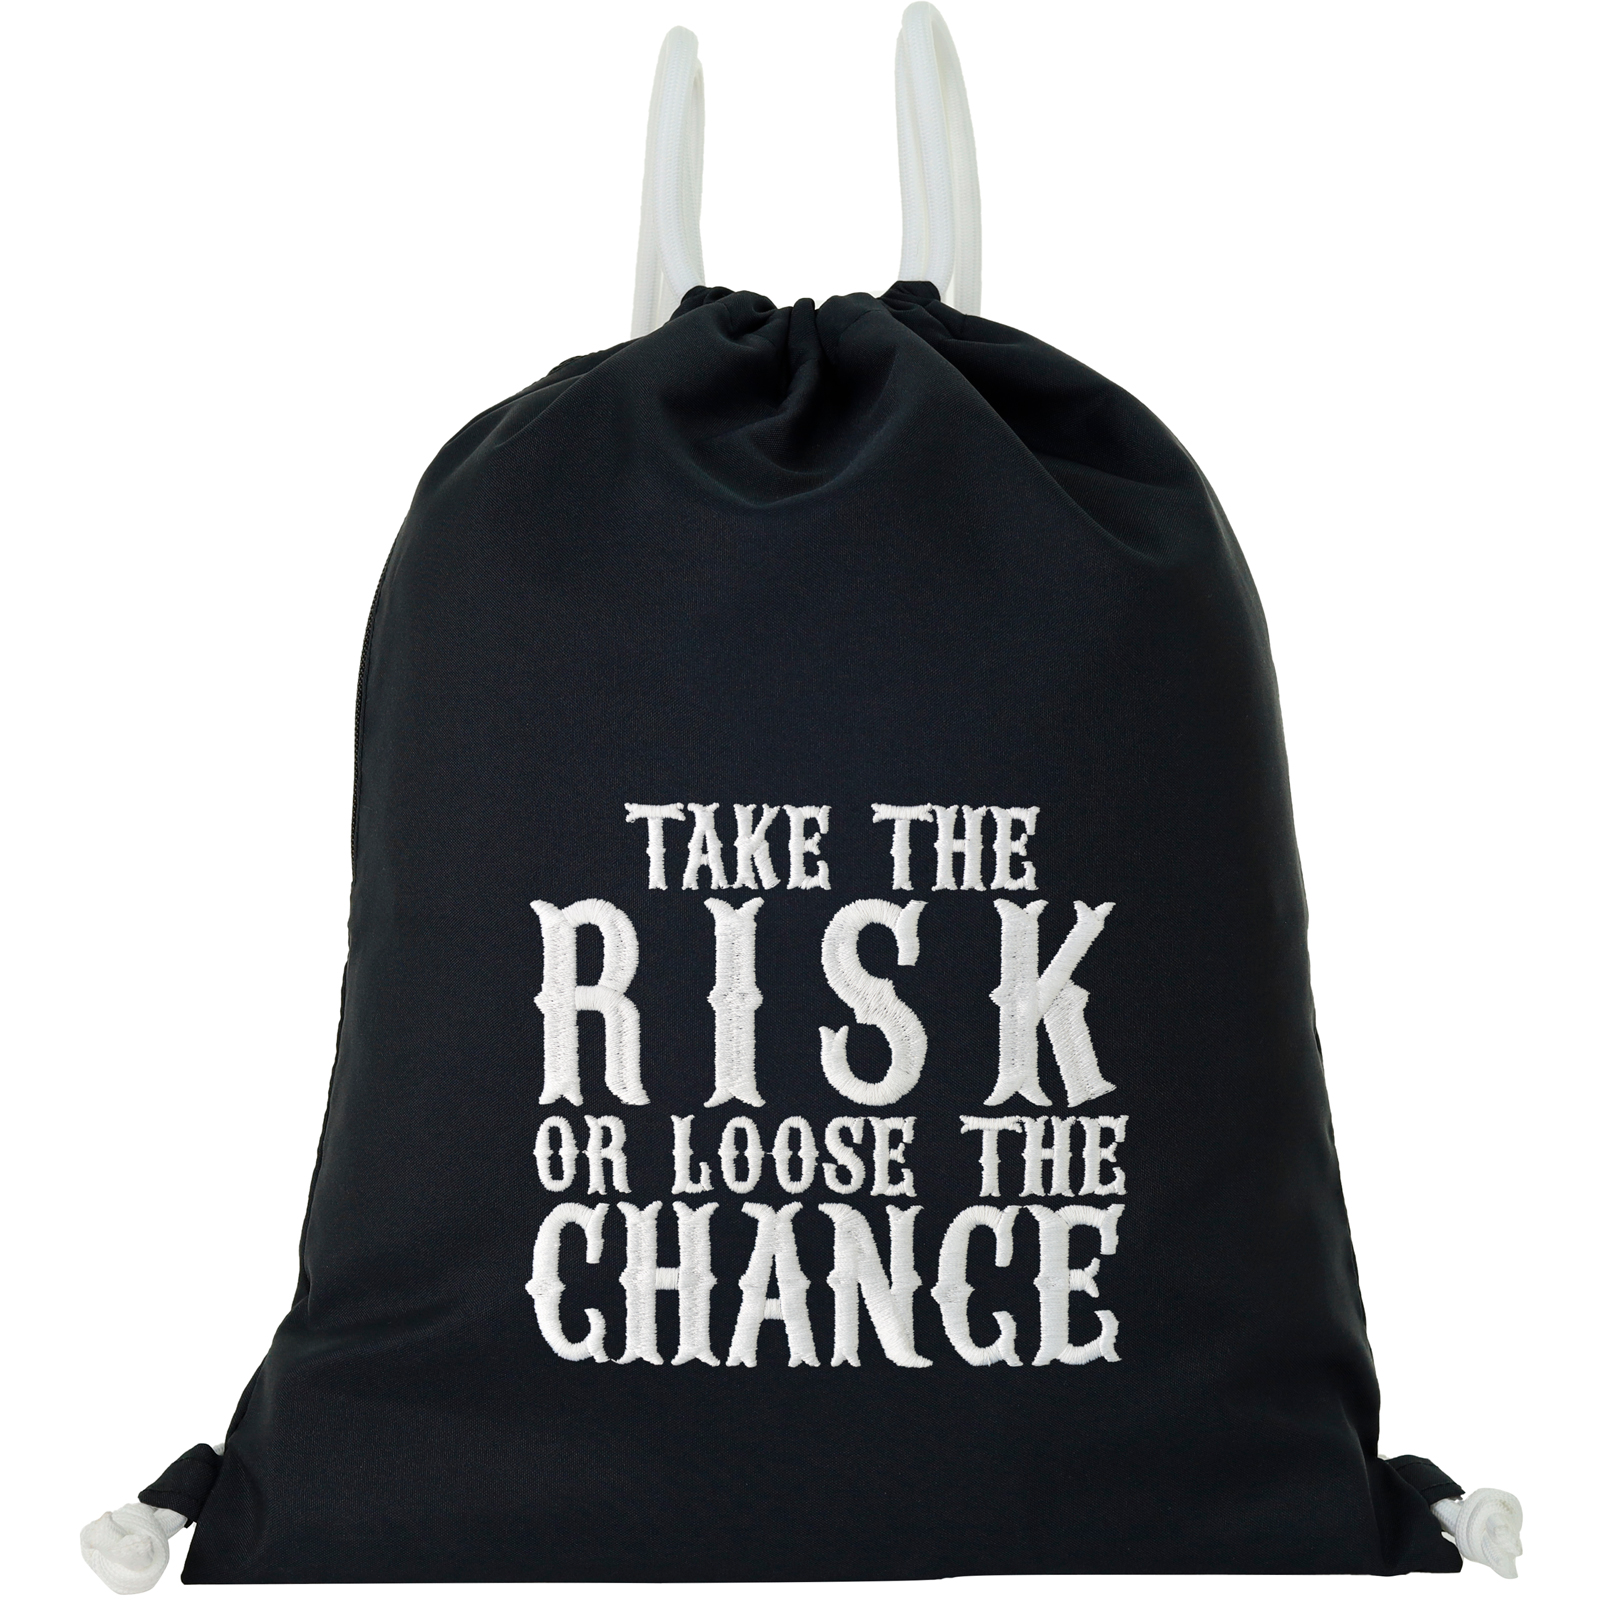 Take the risk or loose chance - Turnbeutel